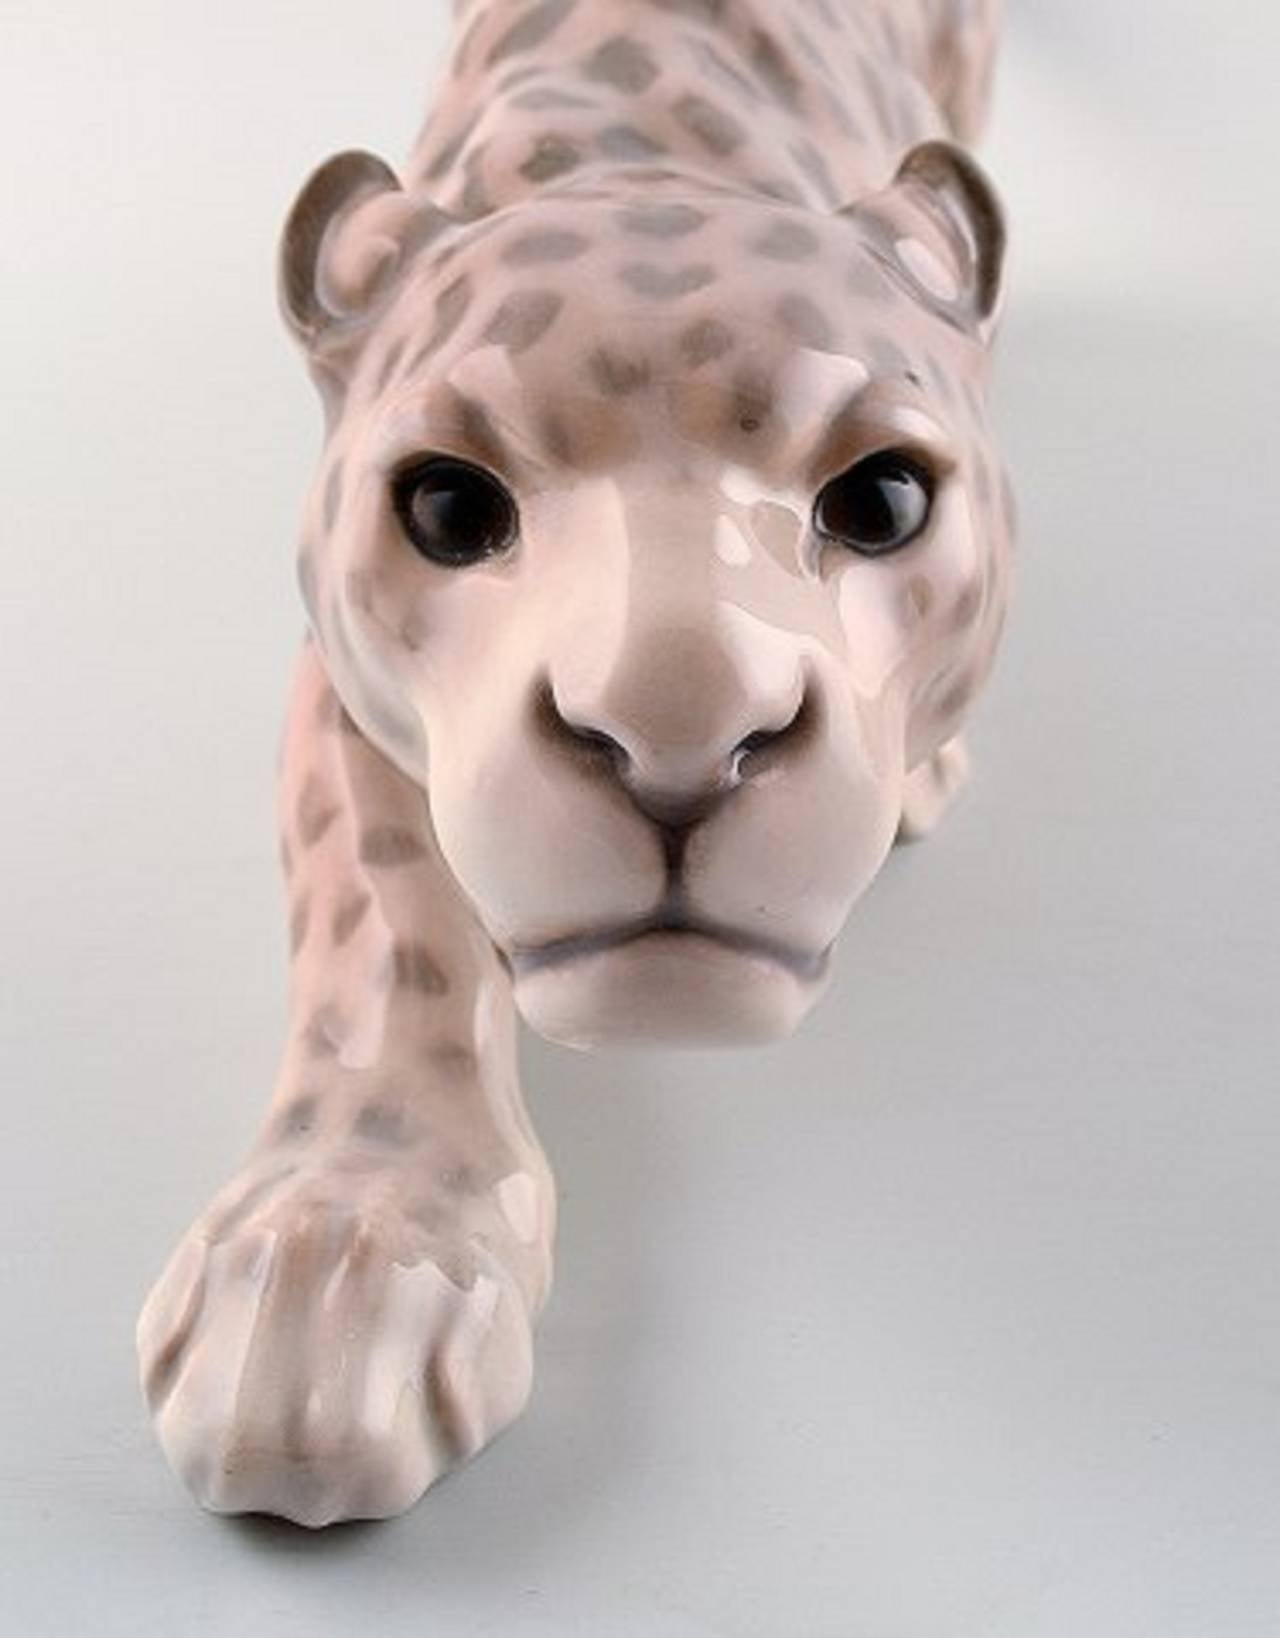 Bing & Grondahl. Porcelain figure, 'Leopard' number 1613.
Length 46 cm.
1st. factory quality. In very good condition.